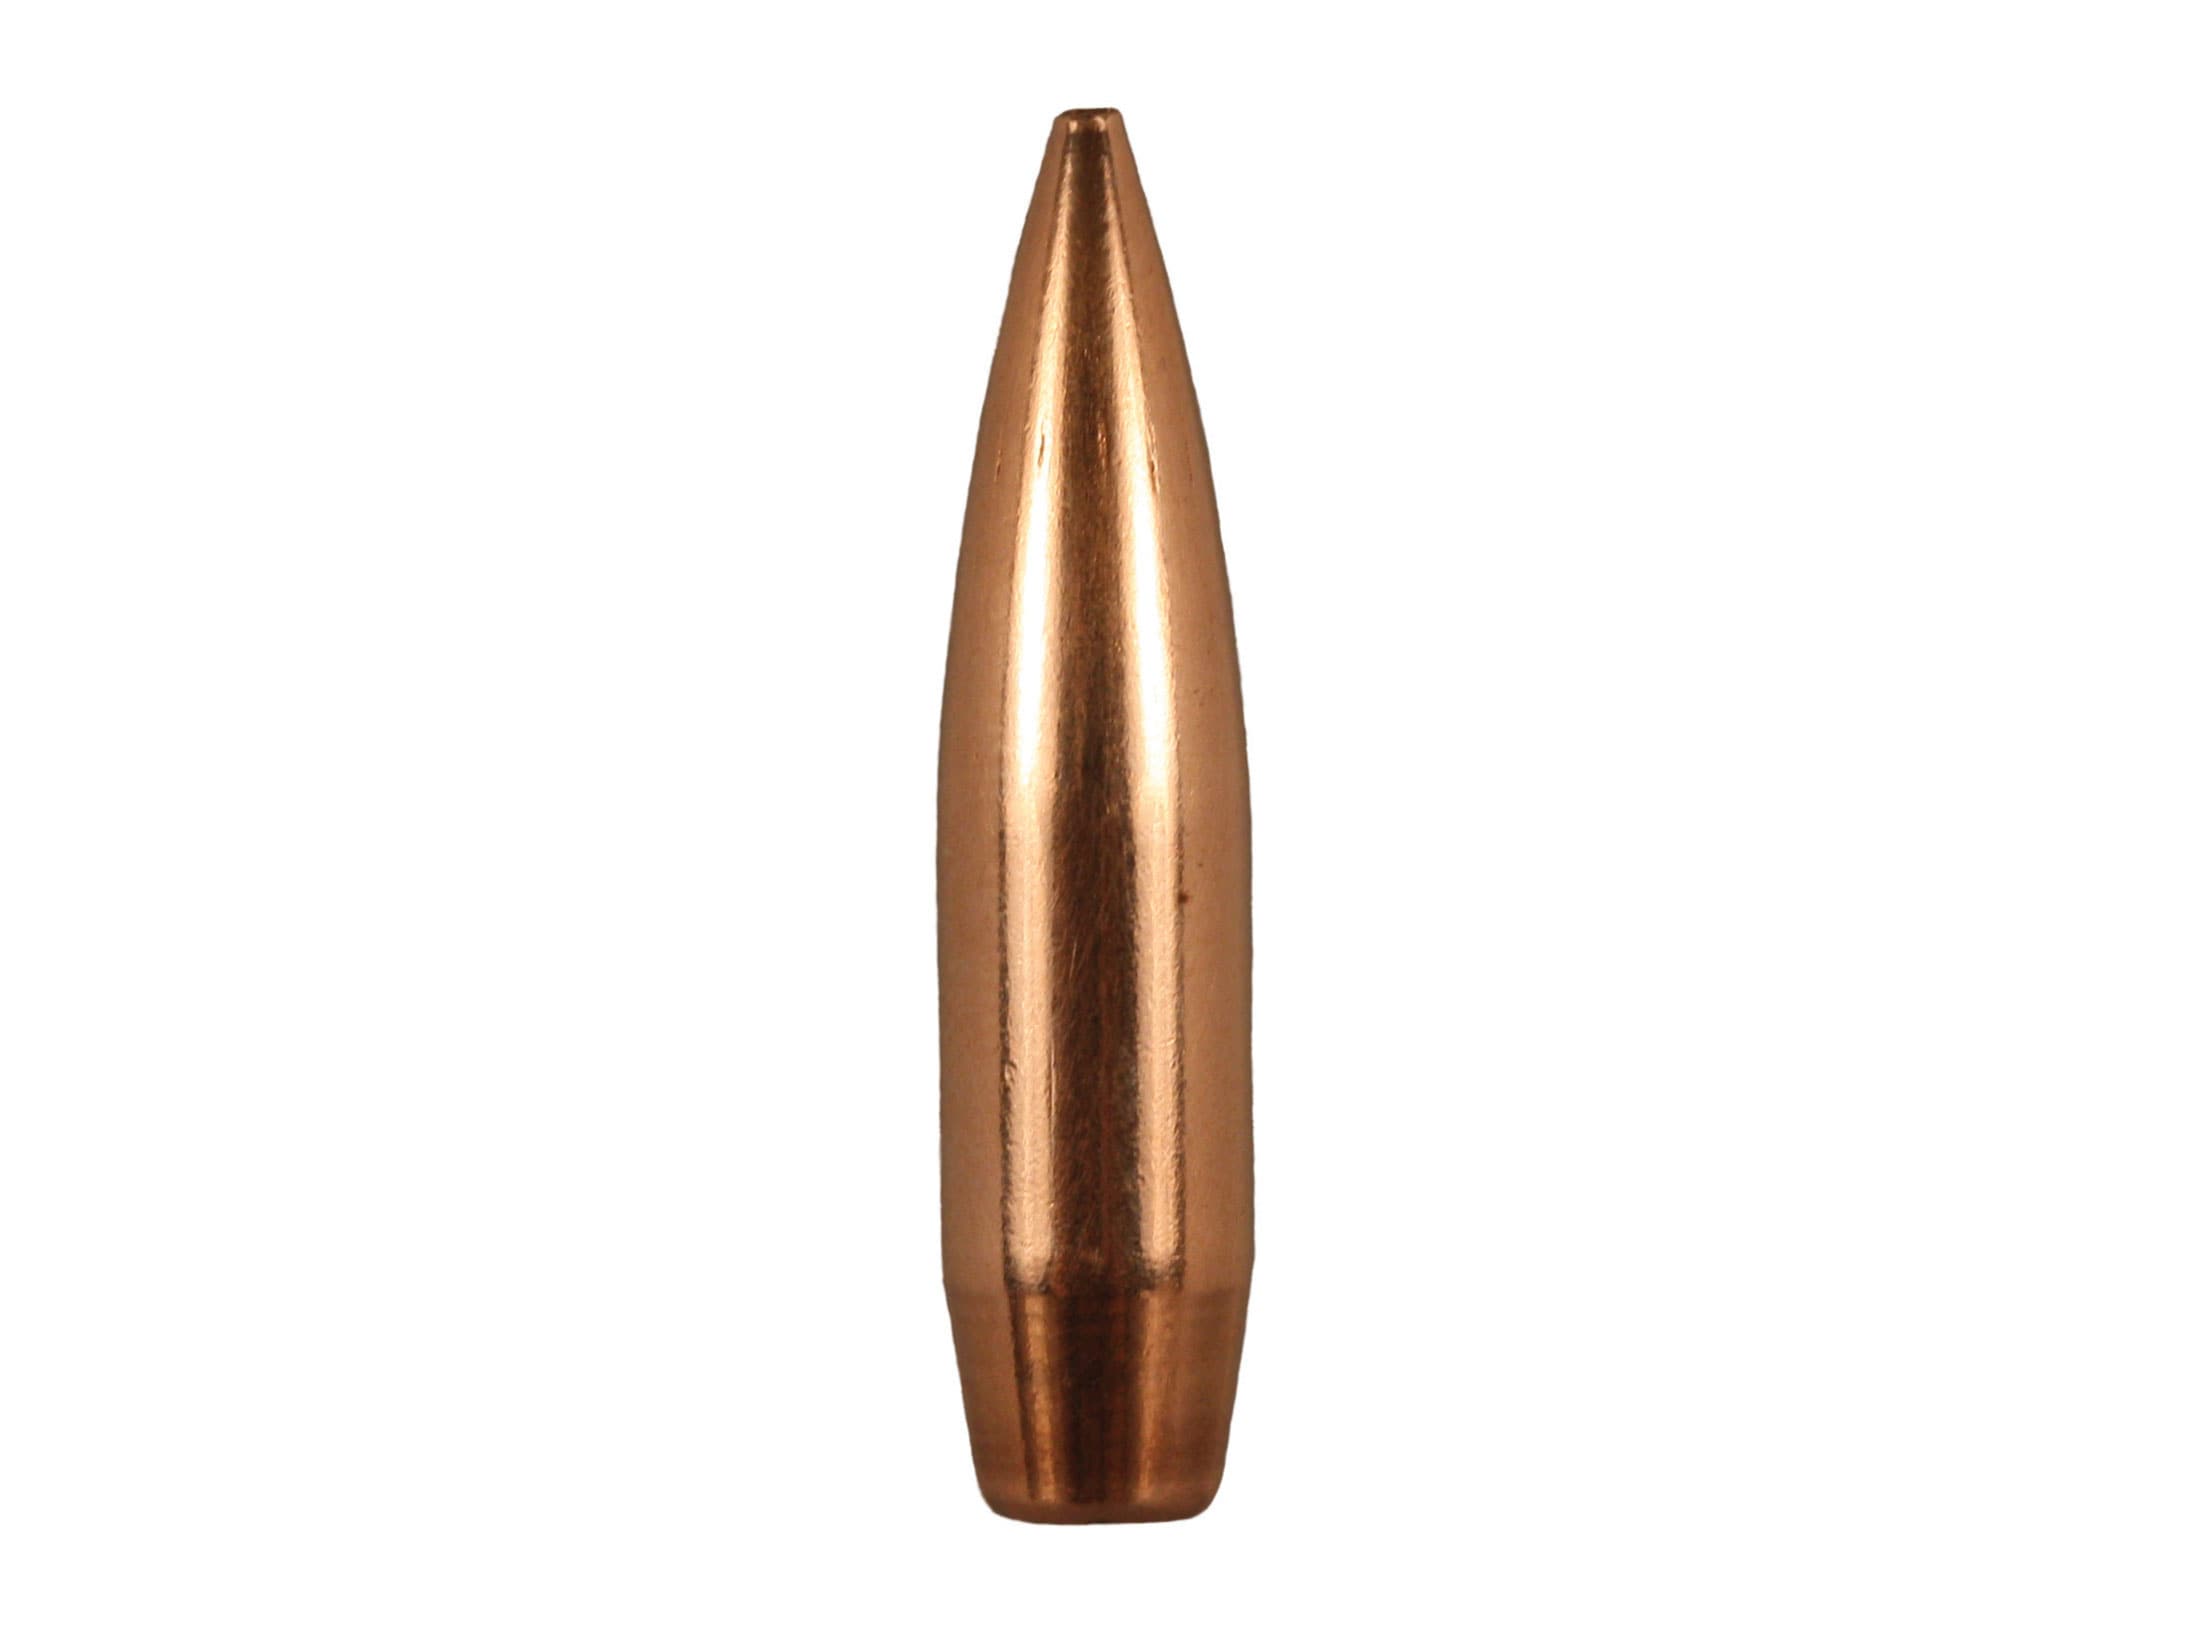 Berger Hunting Bullets 270 Caliber (277 Diameter) 140 Grain VLD Hollow Point Boat Tail Box of 100